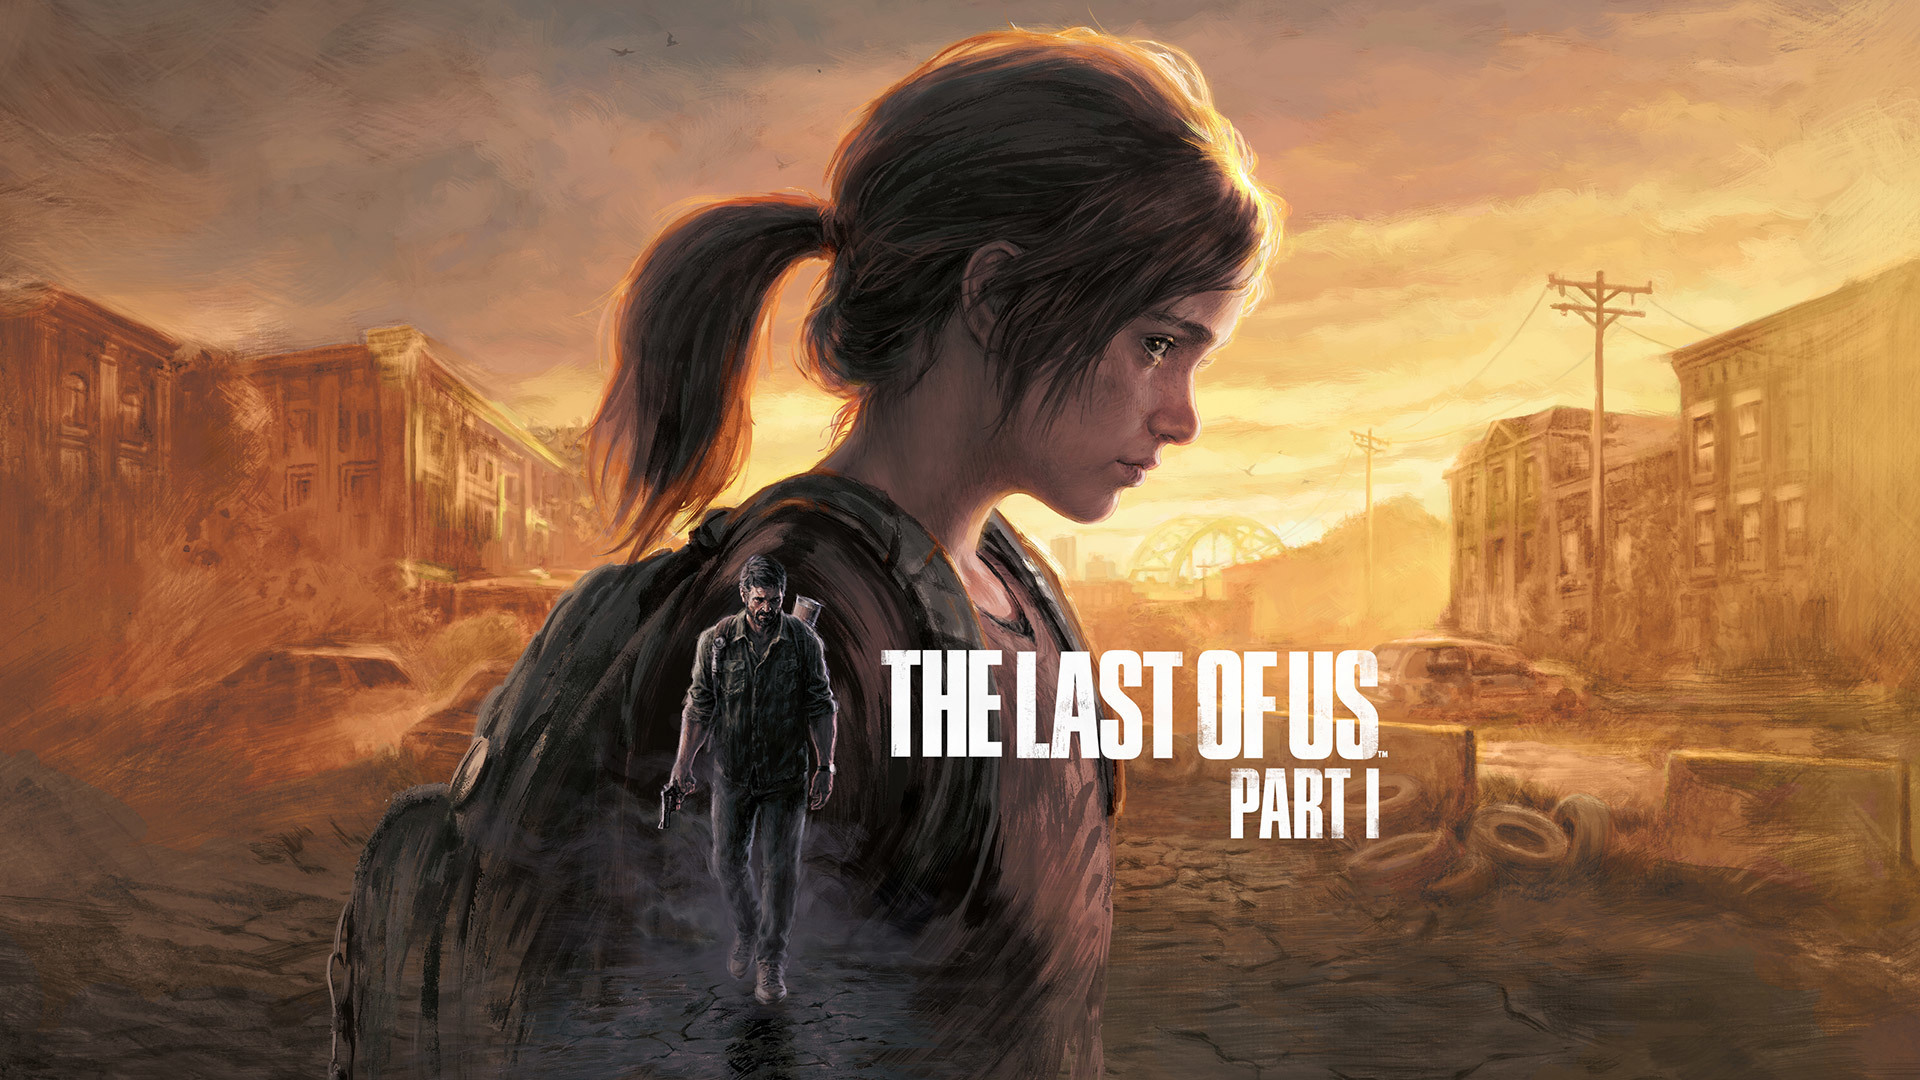 Artwork of The Last of Us Part I